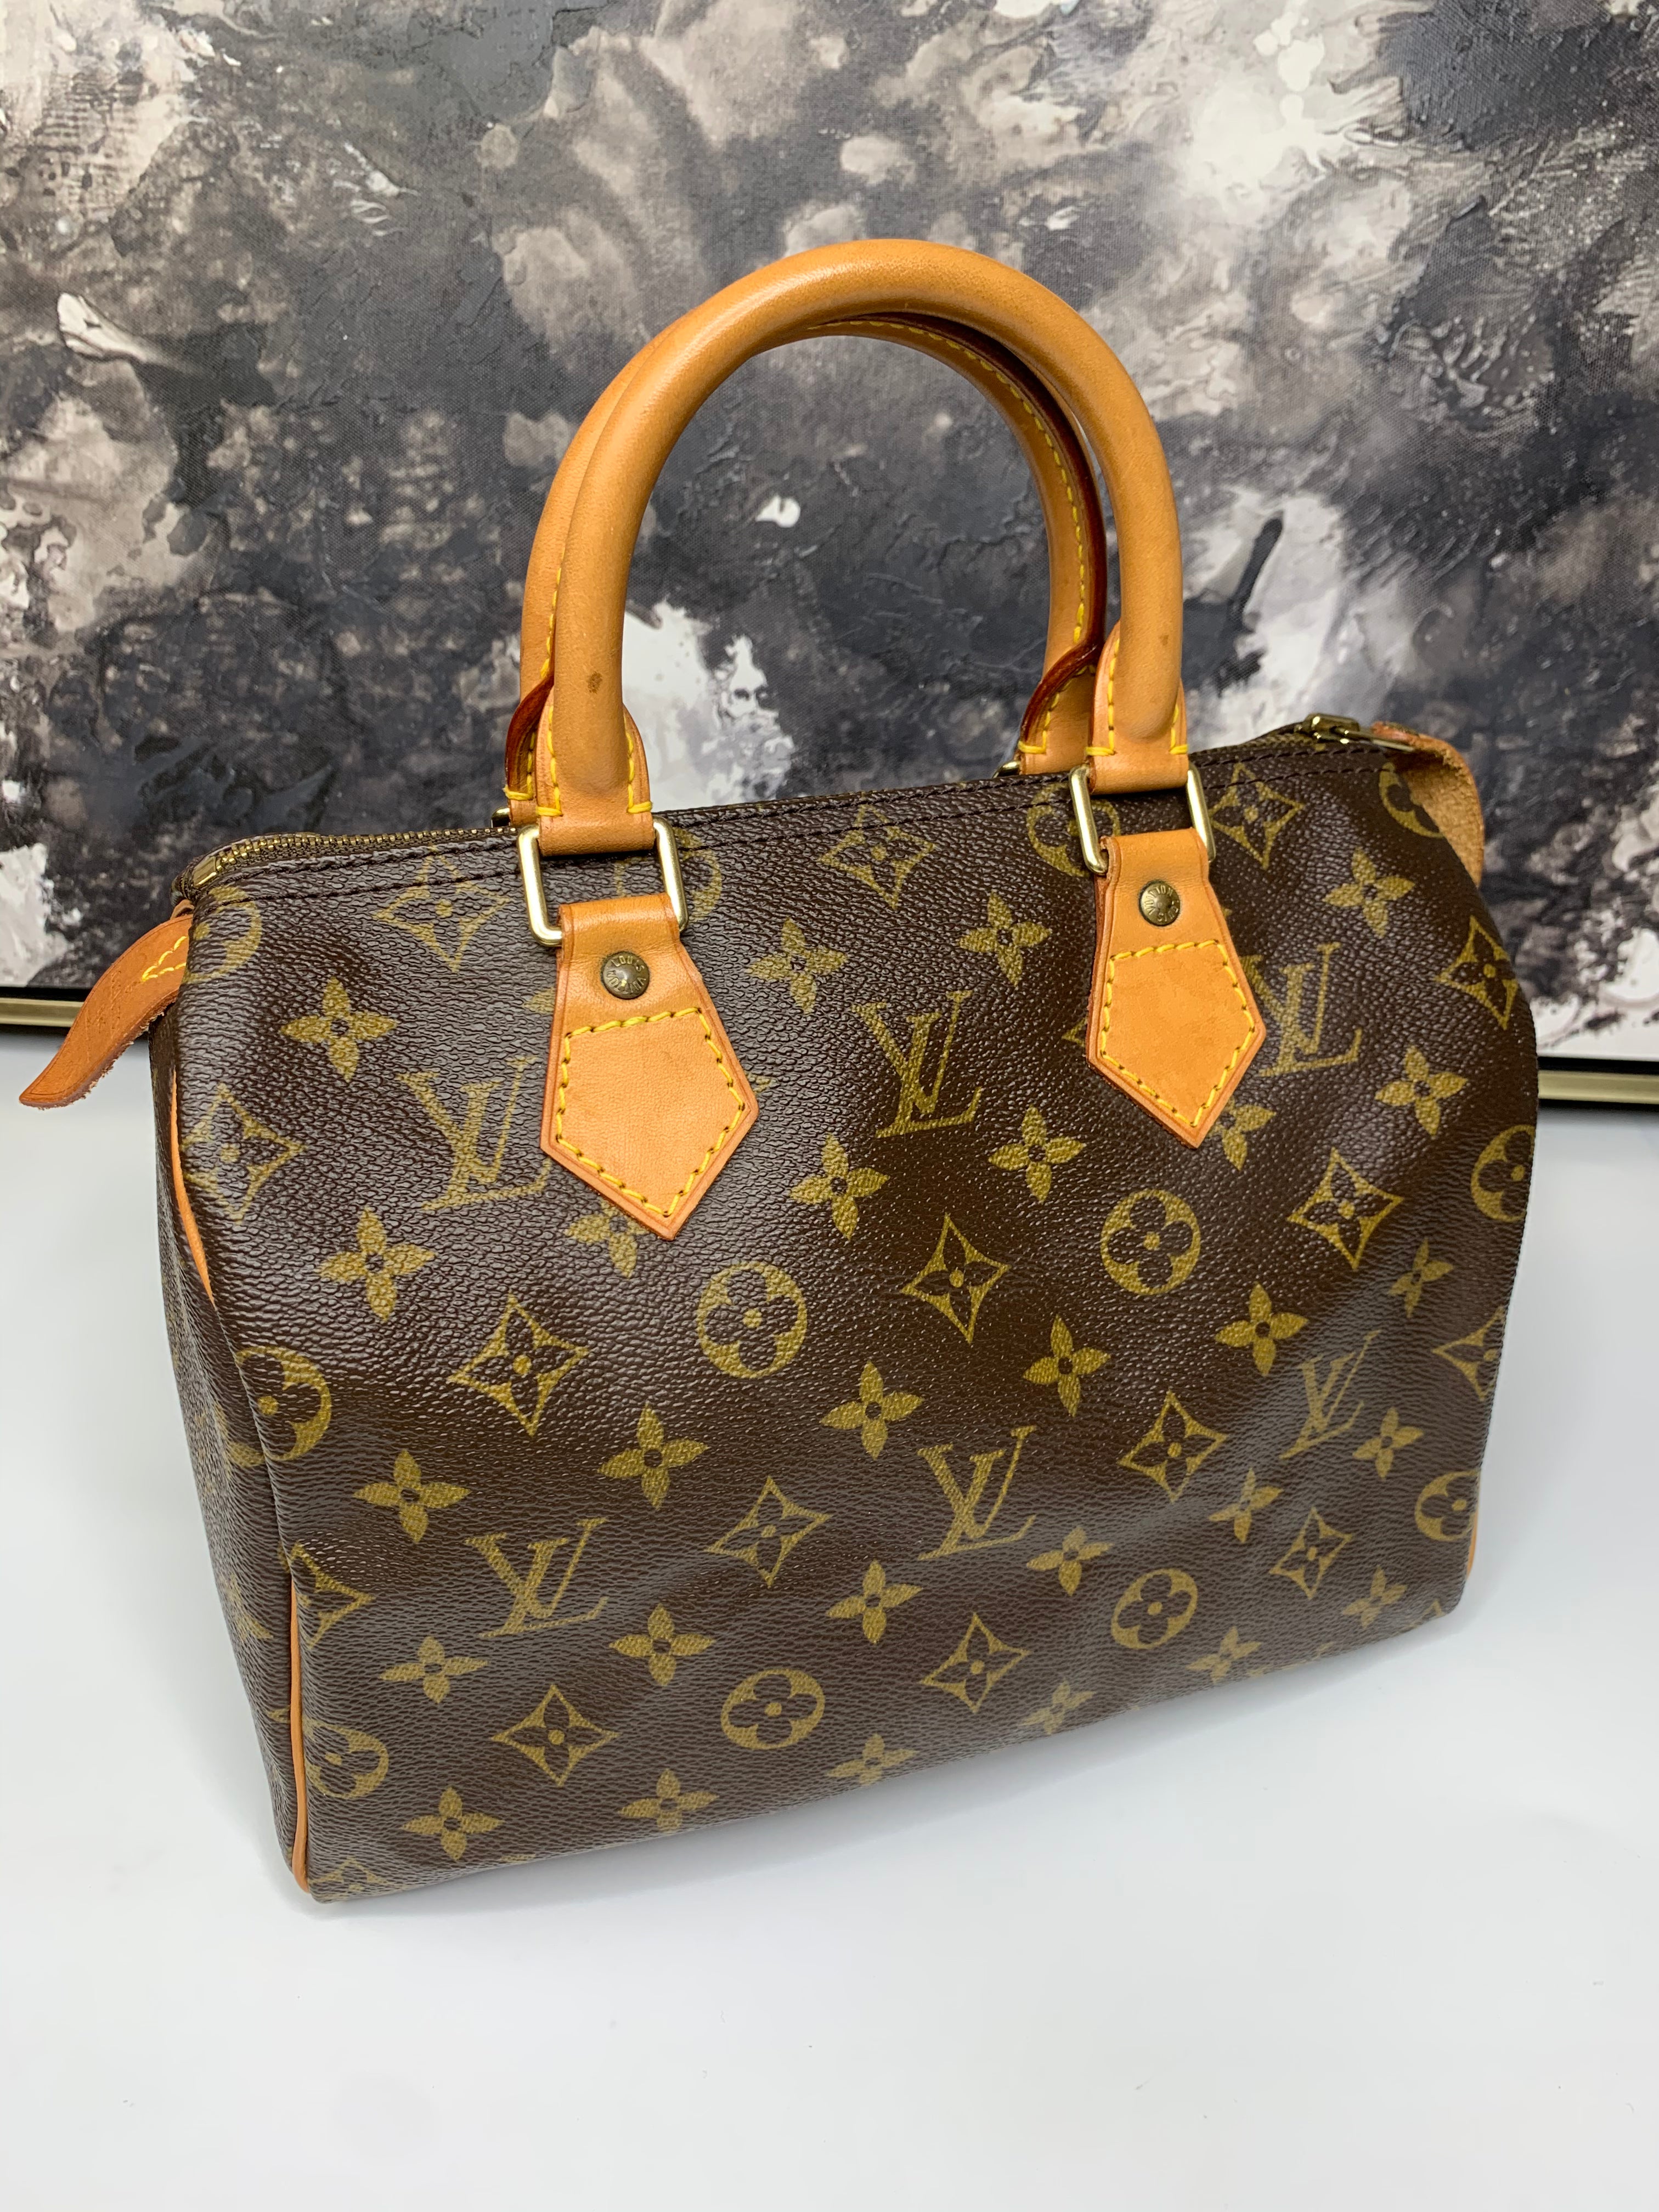 Louis Vuitton comparison of the Toiletry Bag 25 and Trousse